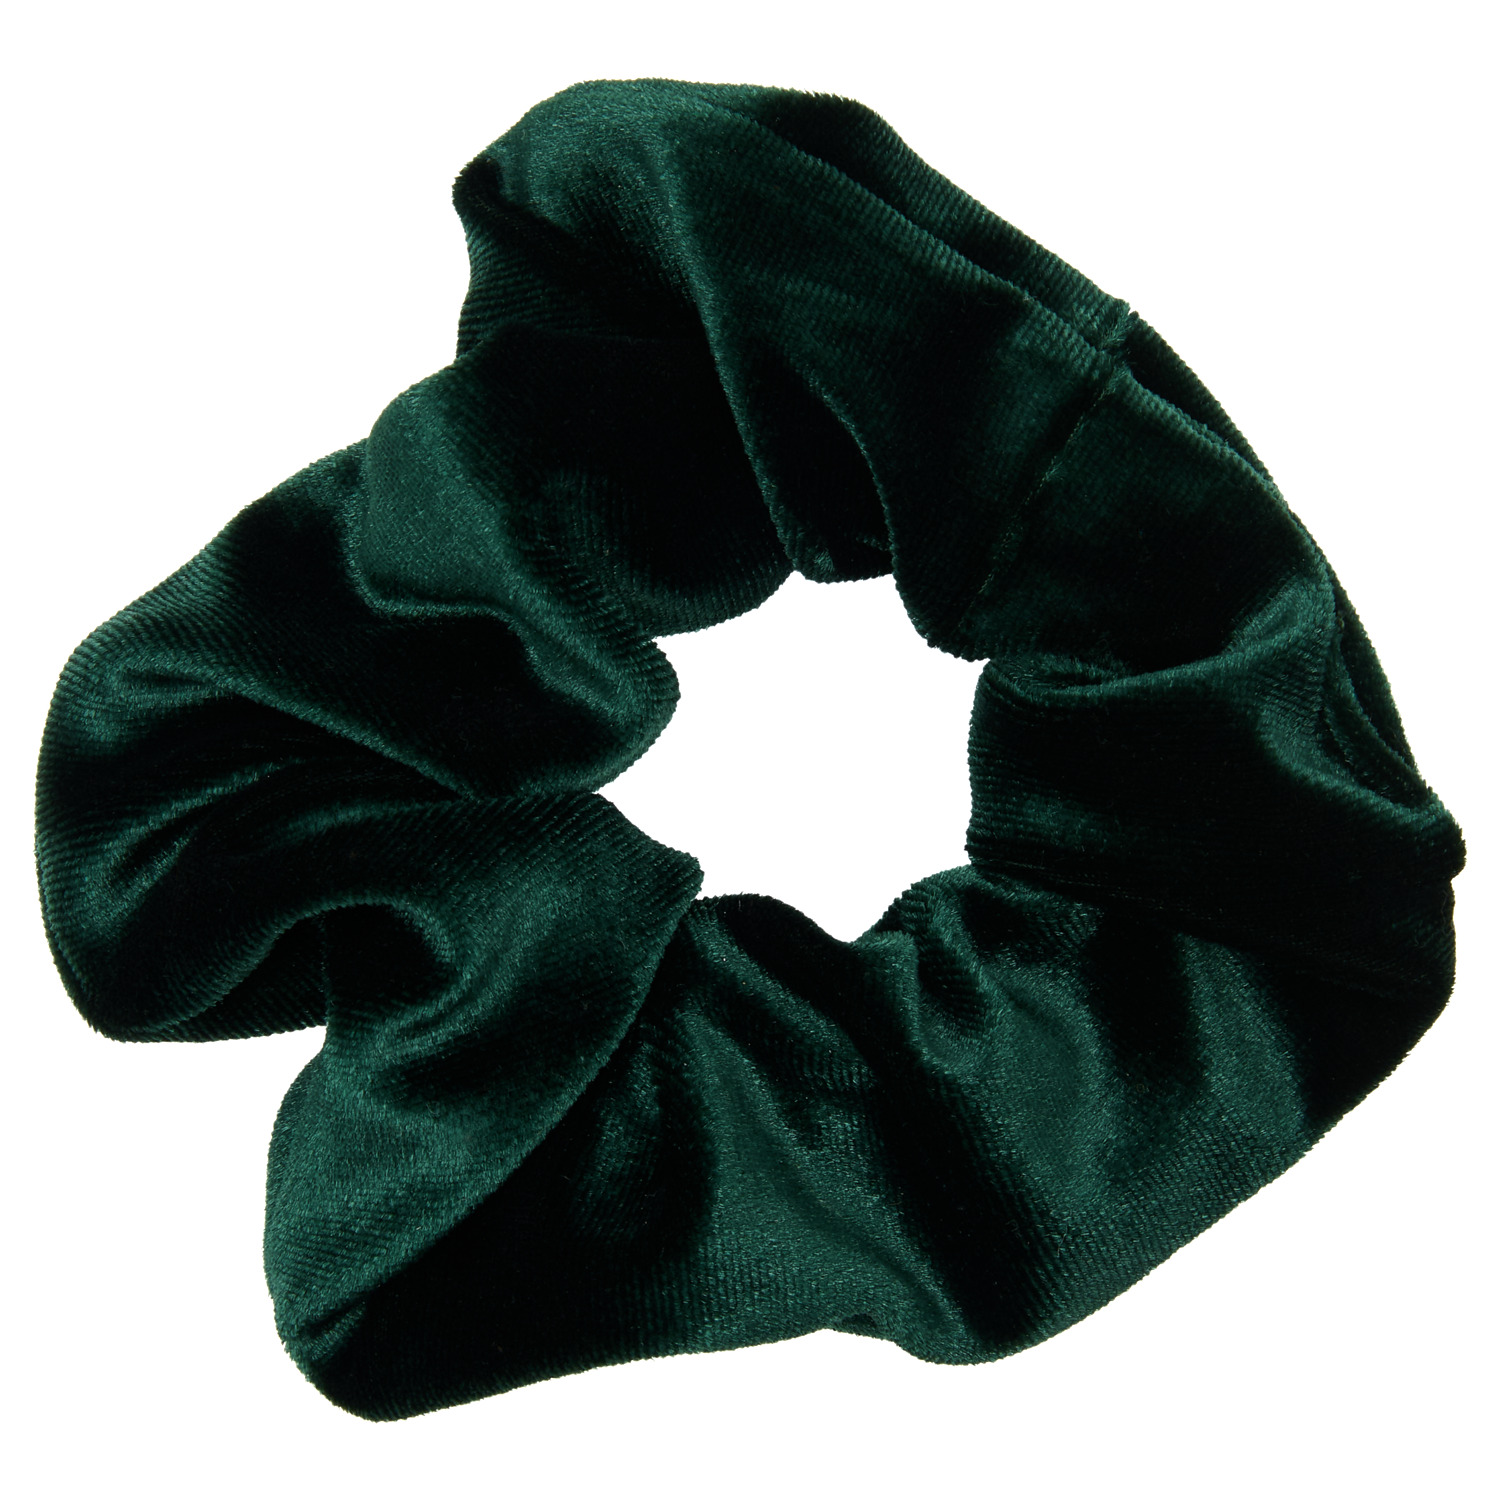 Scrunchie recycled green